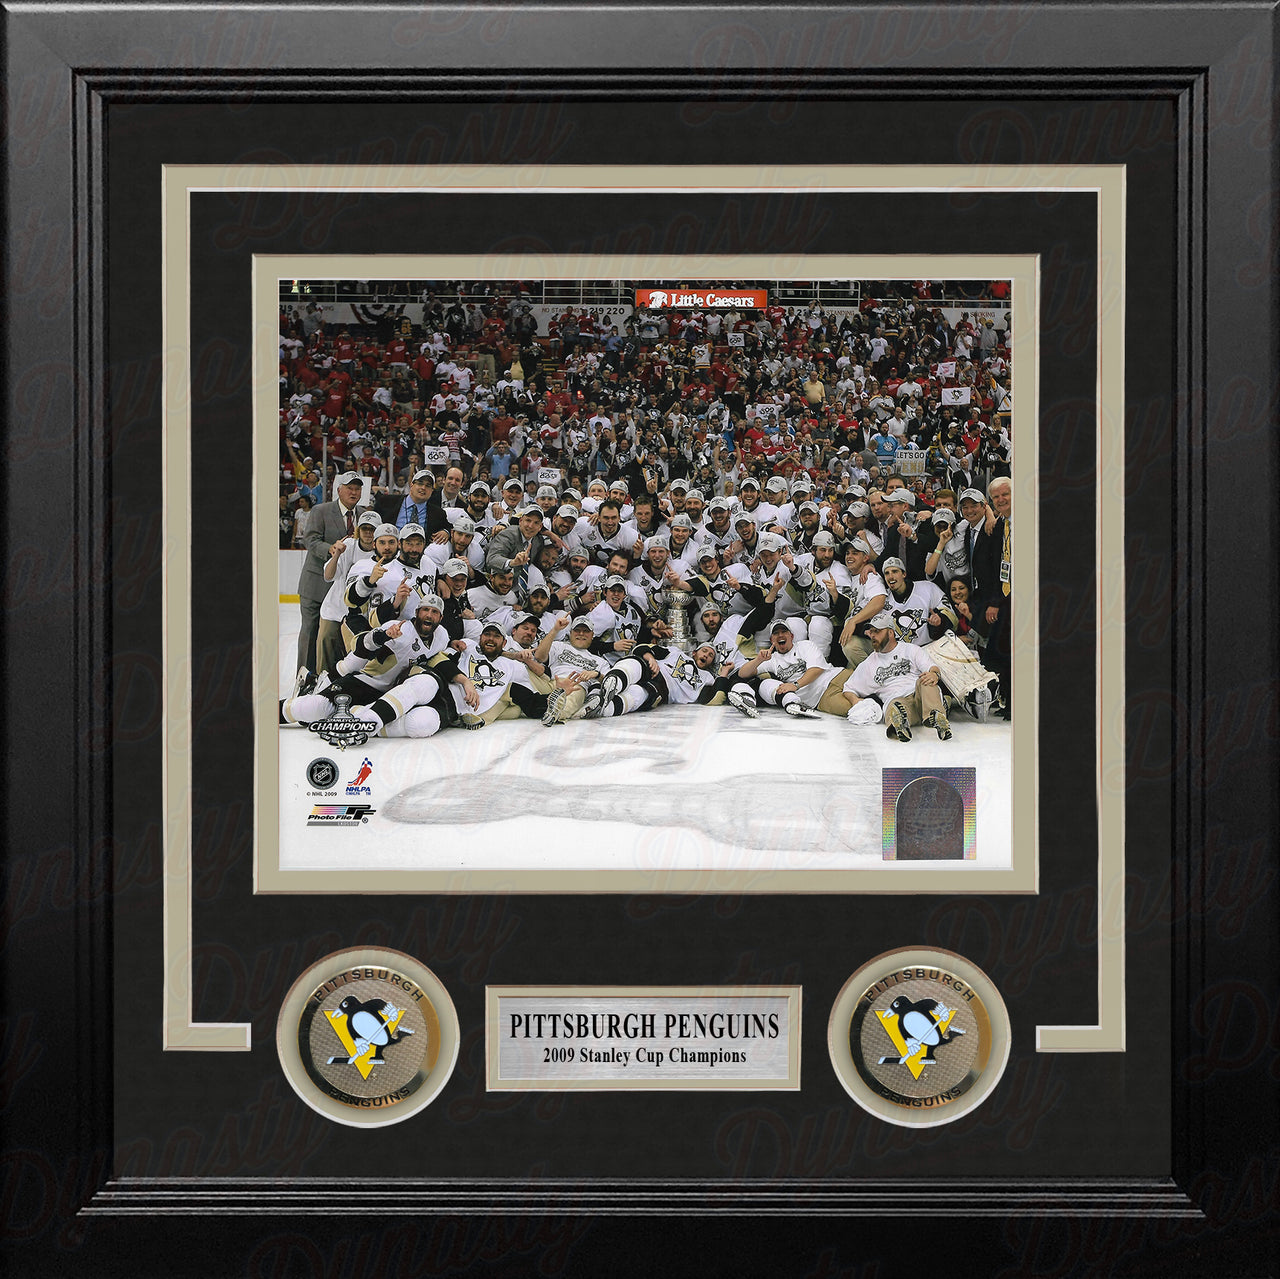 Pittsburgh Penguins 2009 Stanley Cup Champions Celebration 8" x 10" Framed Hockey Photo